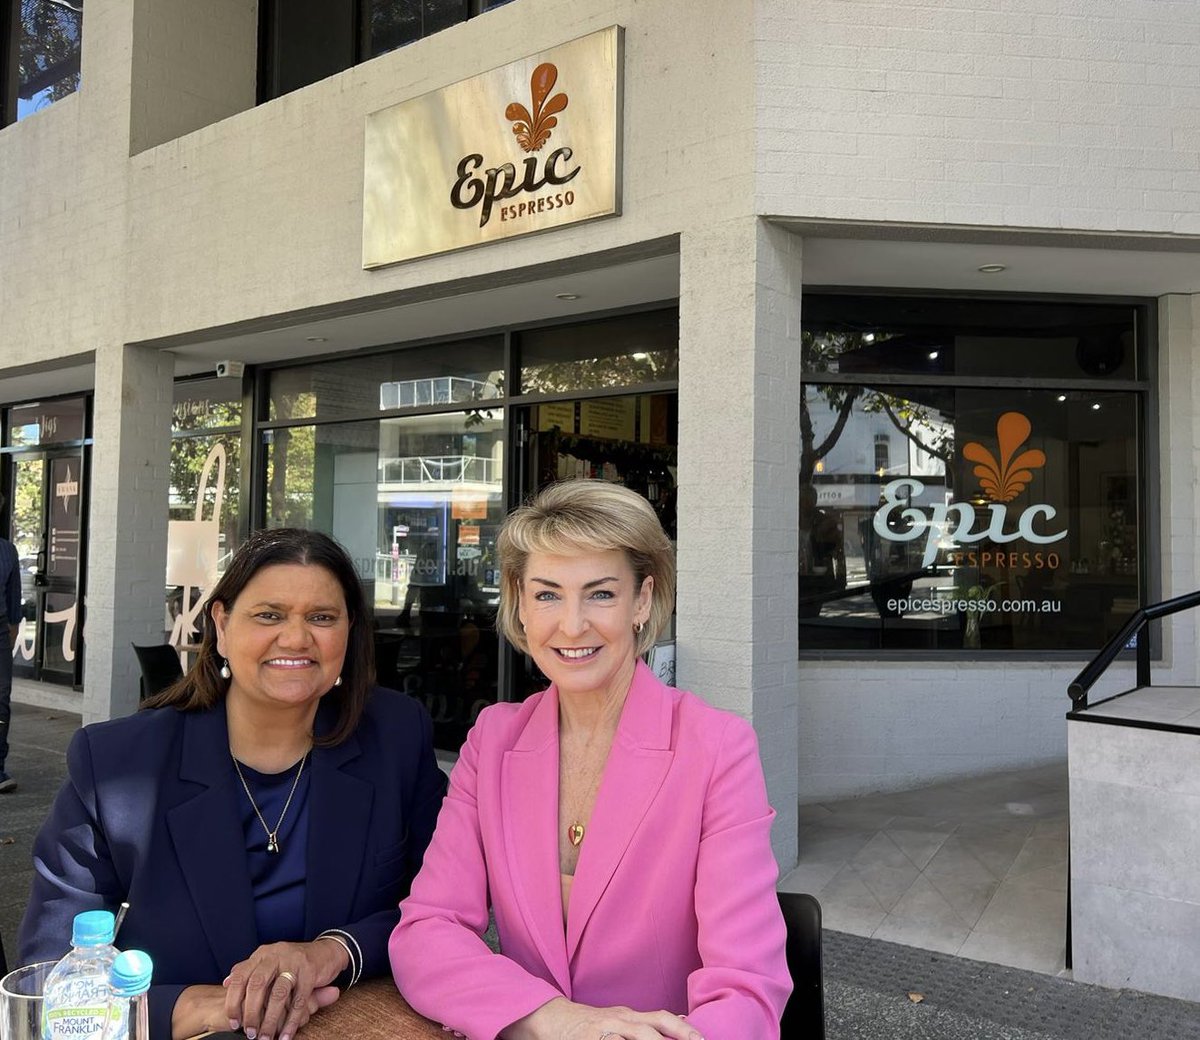 Great to catch up with WA Liberal Senate Candidate Trish Botha and support a great small business - Epic Café! As a Liberal, Trish understands the contribution that small businesses make to our economy each and every day.